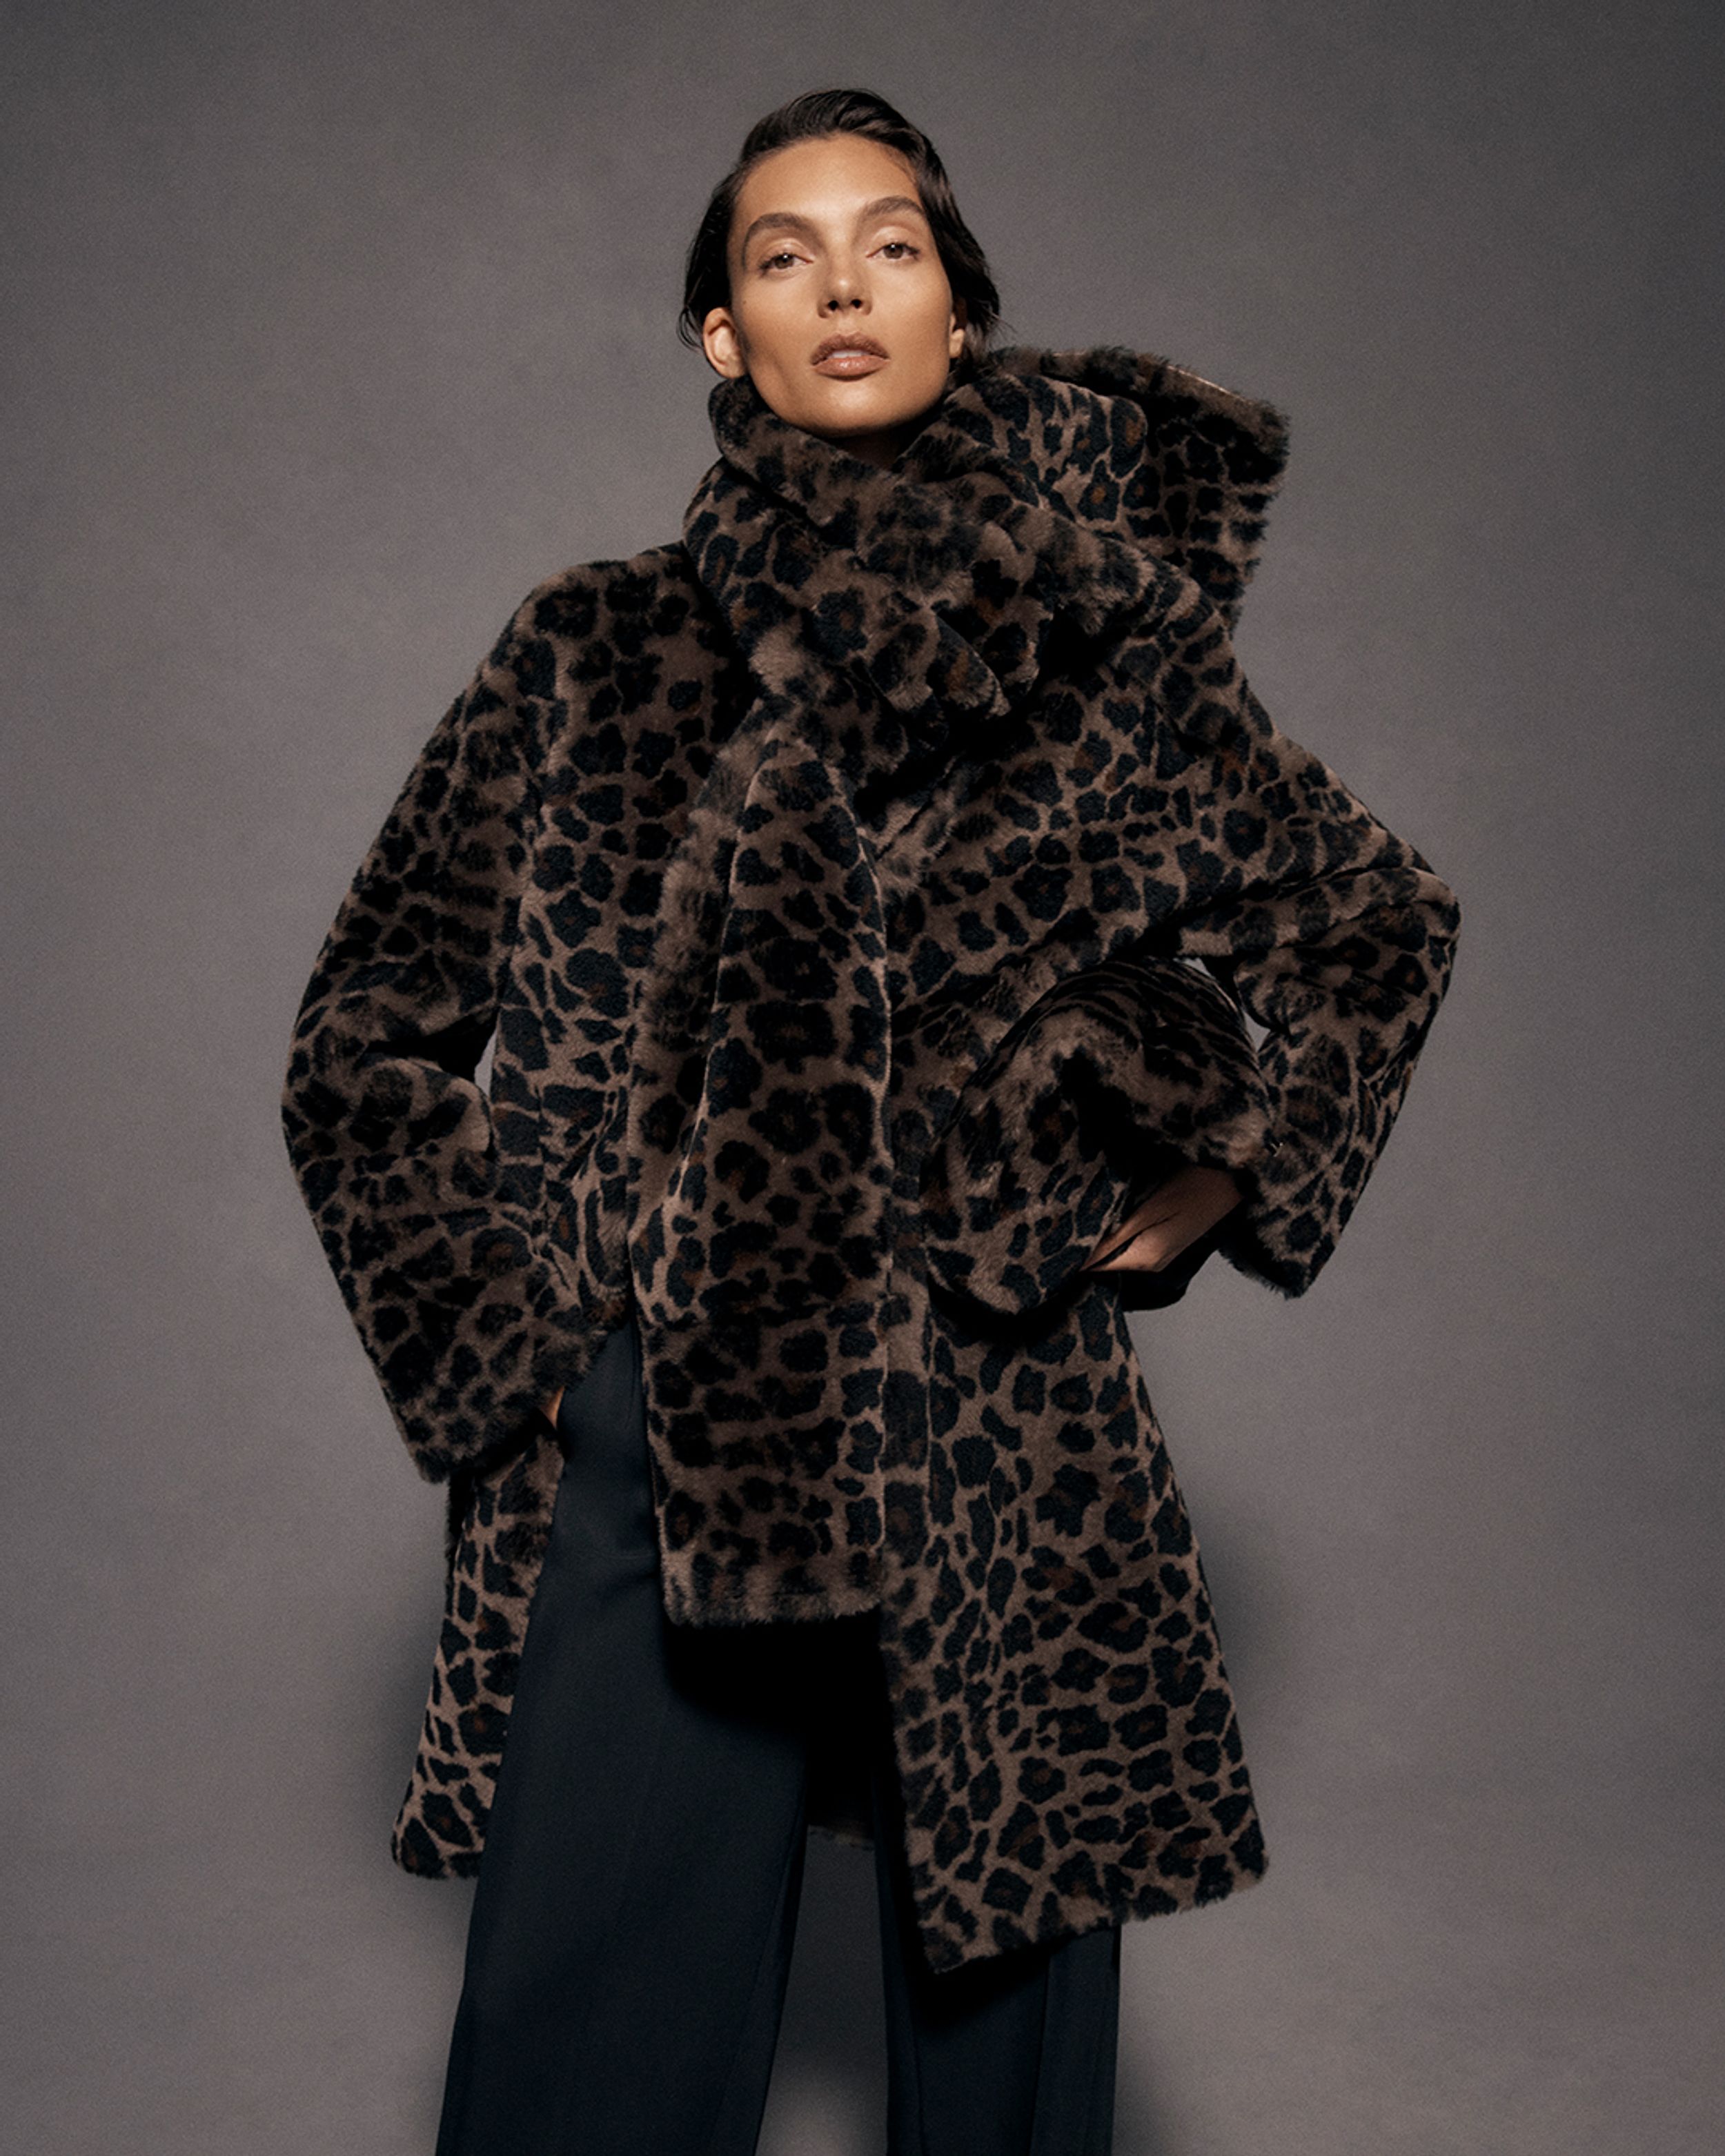 Brunette model wearing a matching leopard-print coat and scarf